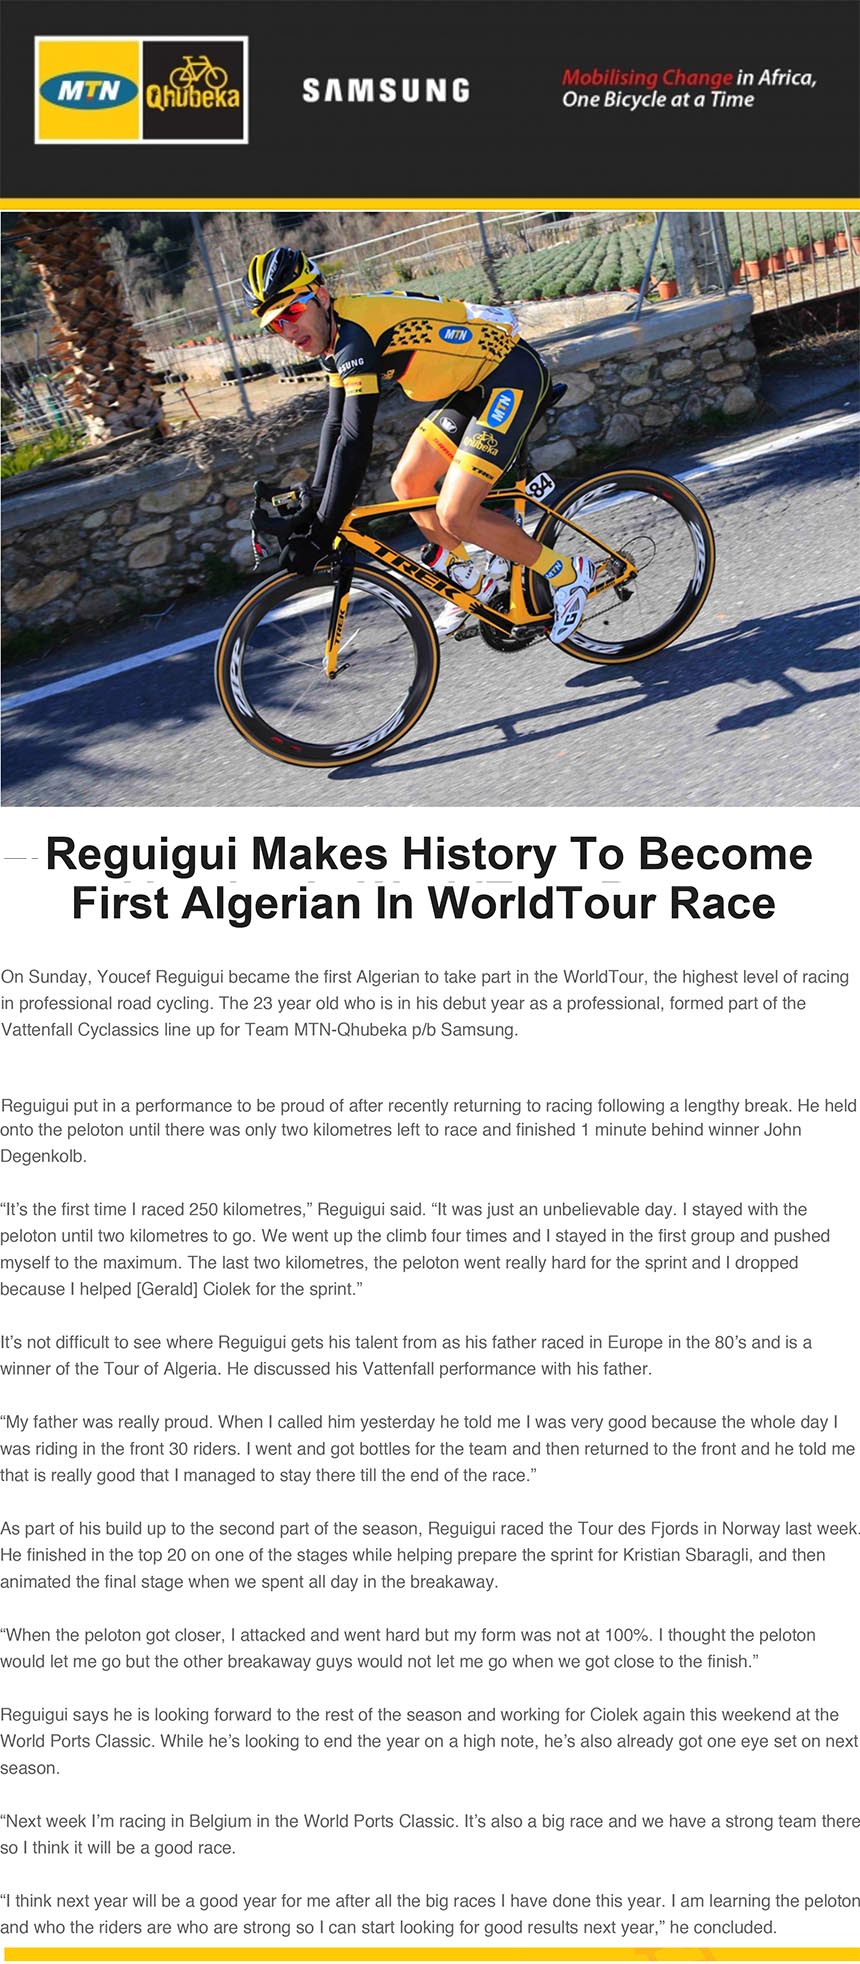 Reguigui Makes History To Become
First Algerian In WorldTour Race
On Sunday, Youcef Reguigui became the first Algerian to take part in the WorldTour, the highest level of racing
in professional road cycling. The 23 year old who is in his debut year as a professional, formed part of the
Vattenfall Cyclassics line up for Team MTN-Qhubeka p/b Samsung.
Reguigui put in a performance to be proud of after recently returning to racing following a lengthy break. He held
26/08/13 21:15
http://posta78a.mailbeta.libero.it/cp/MailMessageBody.jsp?th=d18653&pid=264b54ec968013c84a7179047d058130 Pagina 2 di 3
onto the peloton until there was only two kilometres left to race and finished 1 minute behind winner John
Degenkolb.
“It’s the first time I raced 250 kilometres,” Reguigui said. “It was just an unbelievable day. I stayed with the
peloton until two kilometres to go. We went up the climb four times and I stayed in the first group and pushed
myself to the maximum. The last two kilometres, the peloton went really hard for the sprint and I dropped
because I helped [Gerald] Ciolek for the sprint.”
It’s not difficult to see where Reguigui gets his talent from as his father raced in Europe in the 80’s and is a
winner of the Tour of Algeria. He discussed his Vattenfall performance